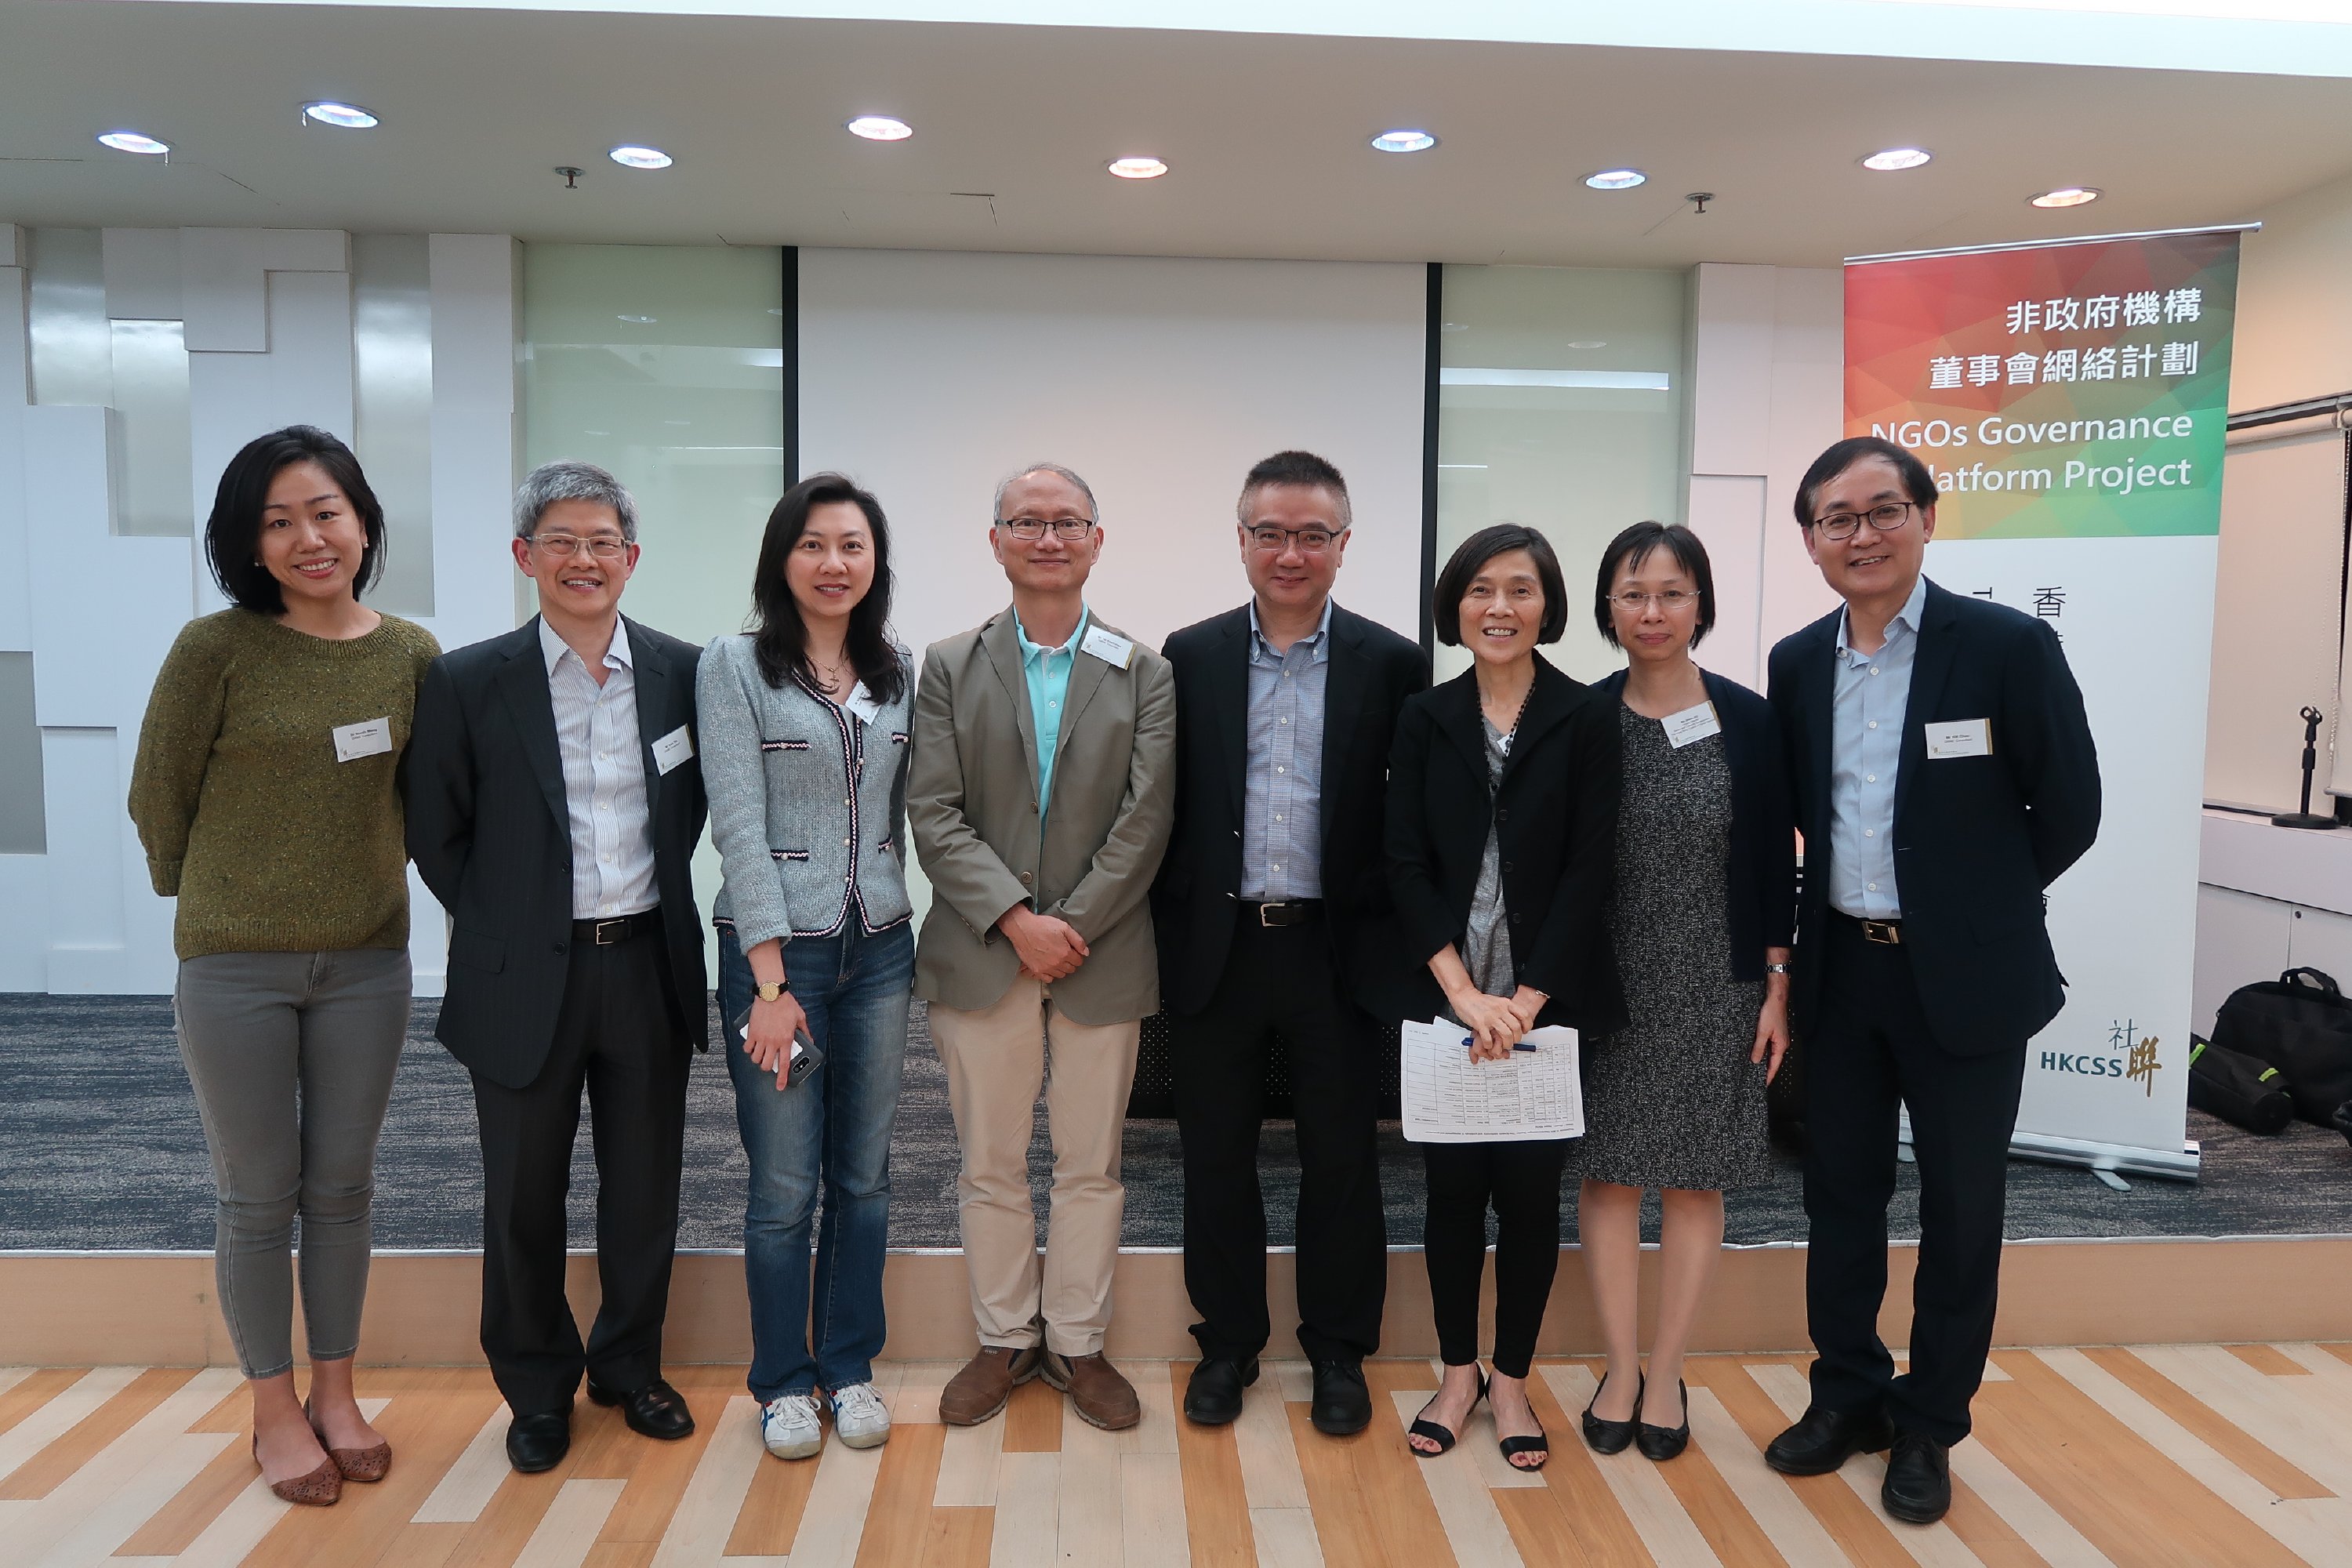 From left: -Dr Norah Wang, Consultant, GAME -Mr Ivan Yiu, Consultant, GAME -Ms Venus Cheng, Consultant, GAME -Mr Tai Keen-man, Consultant, GAME -Mr Cliff Choi, Business Director, HKCSS -	Ms Christine Fang, Consultant, GAME -Ms Stella Ho, Project Director, HKCSS -Mr K M Chan, Consultant, GAME